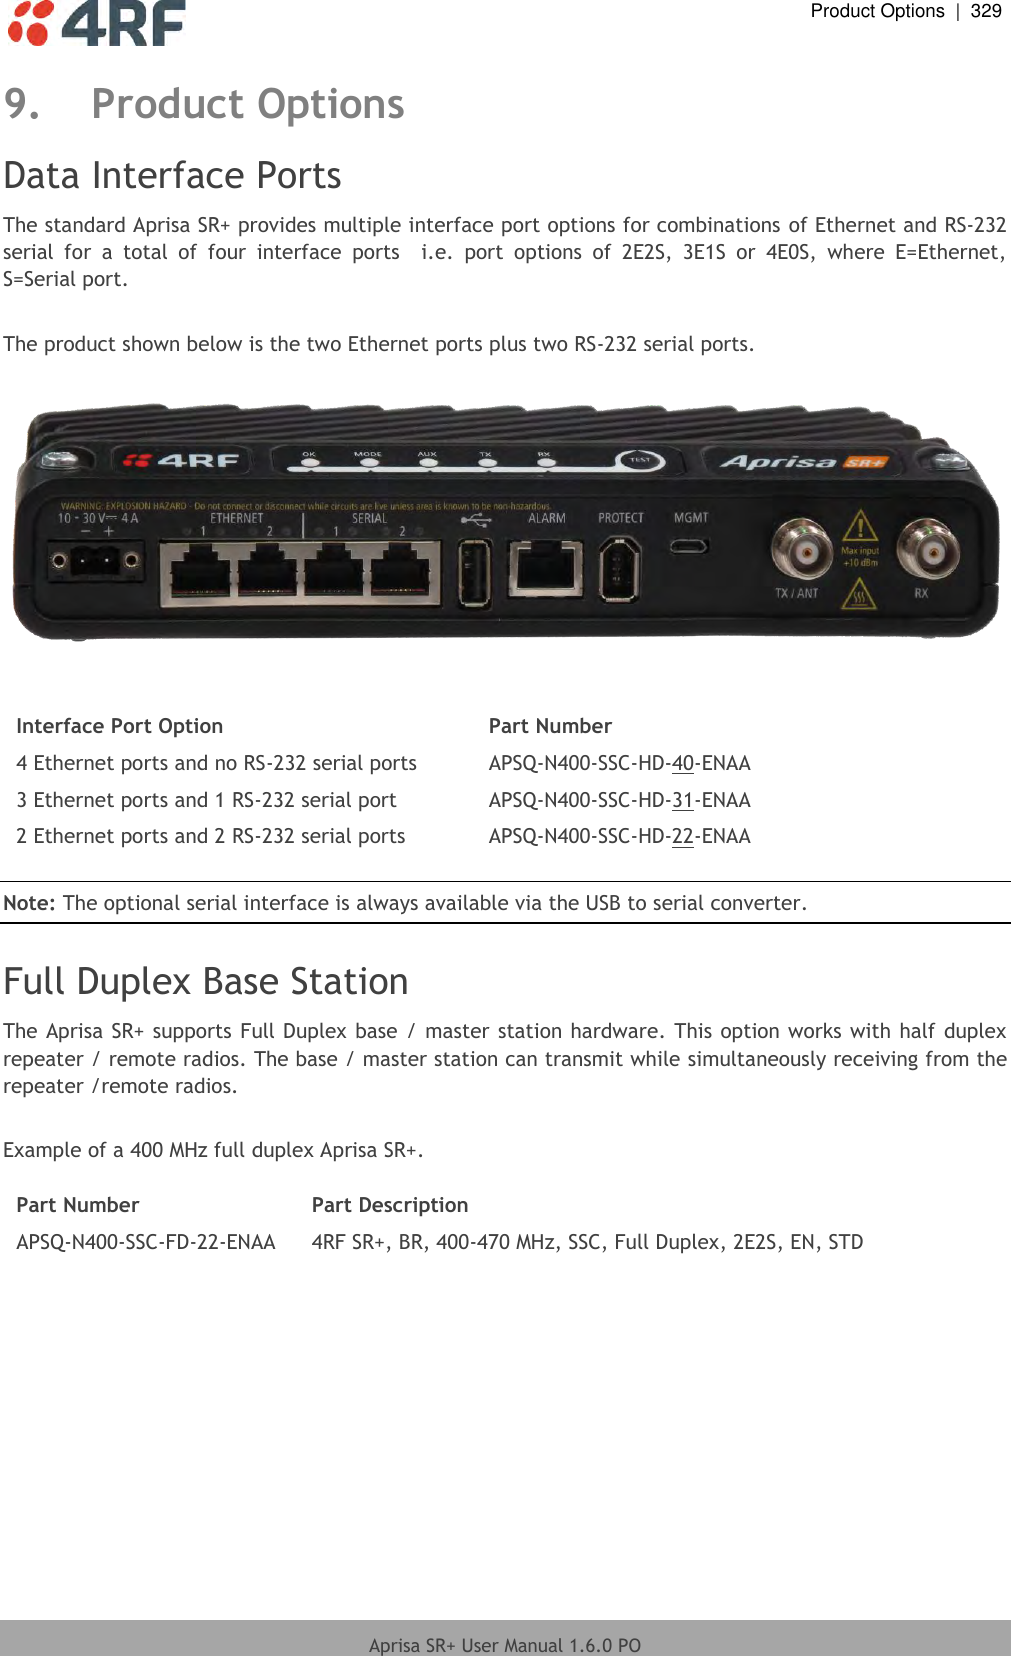  Product Options  |  329  Aprisa SR+ User Manual 1.6.0 PO  9. Product Options Data Interface Ports The standard Aprisa SR+ provides multiple interface port options for combinations of Ethernet and RS-232 serial  for  a  total  of  four  interface  ports    i.e.  port  options  of  2E2S,  3E1S  or  4E0S,  where  E=Ethernet, S=Serial port.  The product shown below is the two Ethernet ports plus two RS-232 serial ports.     Interface Port Option Part Number 4 Ethernet ports and no RS-232 serial ports APSQ-N400-SSC-HD-40-ENAA 3 Ethernet ports and 1 RS-232 serial port APSQ-N400-SSC-HD-31-ENAA 2 Ethernet ports and 2 RS-232 serial ports APSQ-N400-SSC-HD-22-ENAA  Note: The optional serial interface is always available via the USB to serial converter.  Full Duplex Base Station The Aprisa SR+ supports Full Duplex base / master station hardware. This option works with half duplex repeater / remote radios. The base / master station can transmit while simultaneously receiving from the repeater /remote radios.   Example of a 400 MHz full duplex Aprisa SR+.  Part Number Part Description APSQ-N400-SSC-FD-22-ENAA 4RF SR+, BR, 400-470 MHz, SSC, Full Duplex, 2E2S, EN, STD  